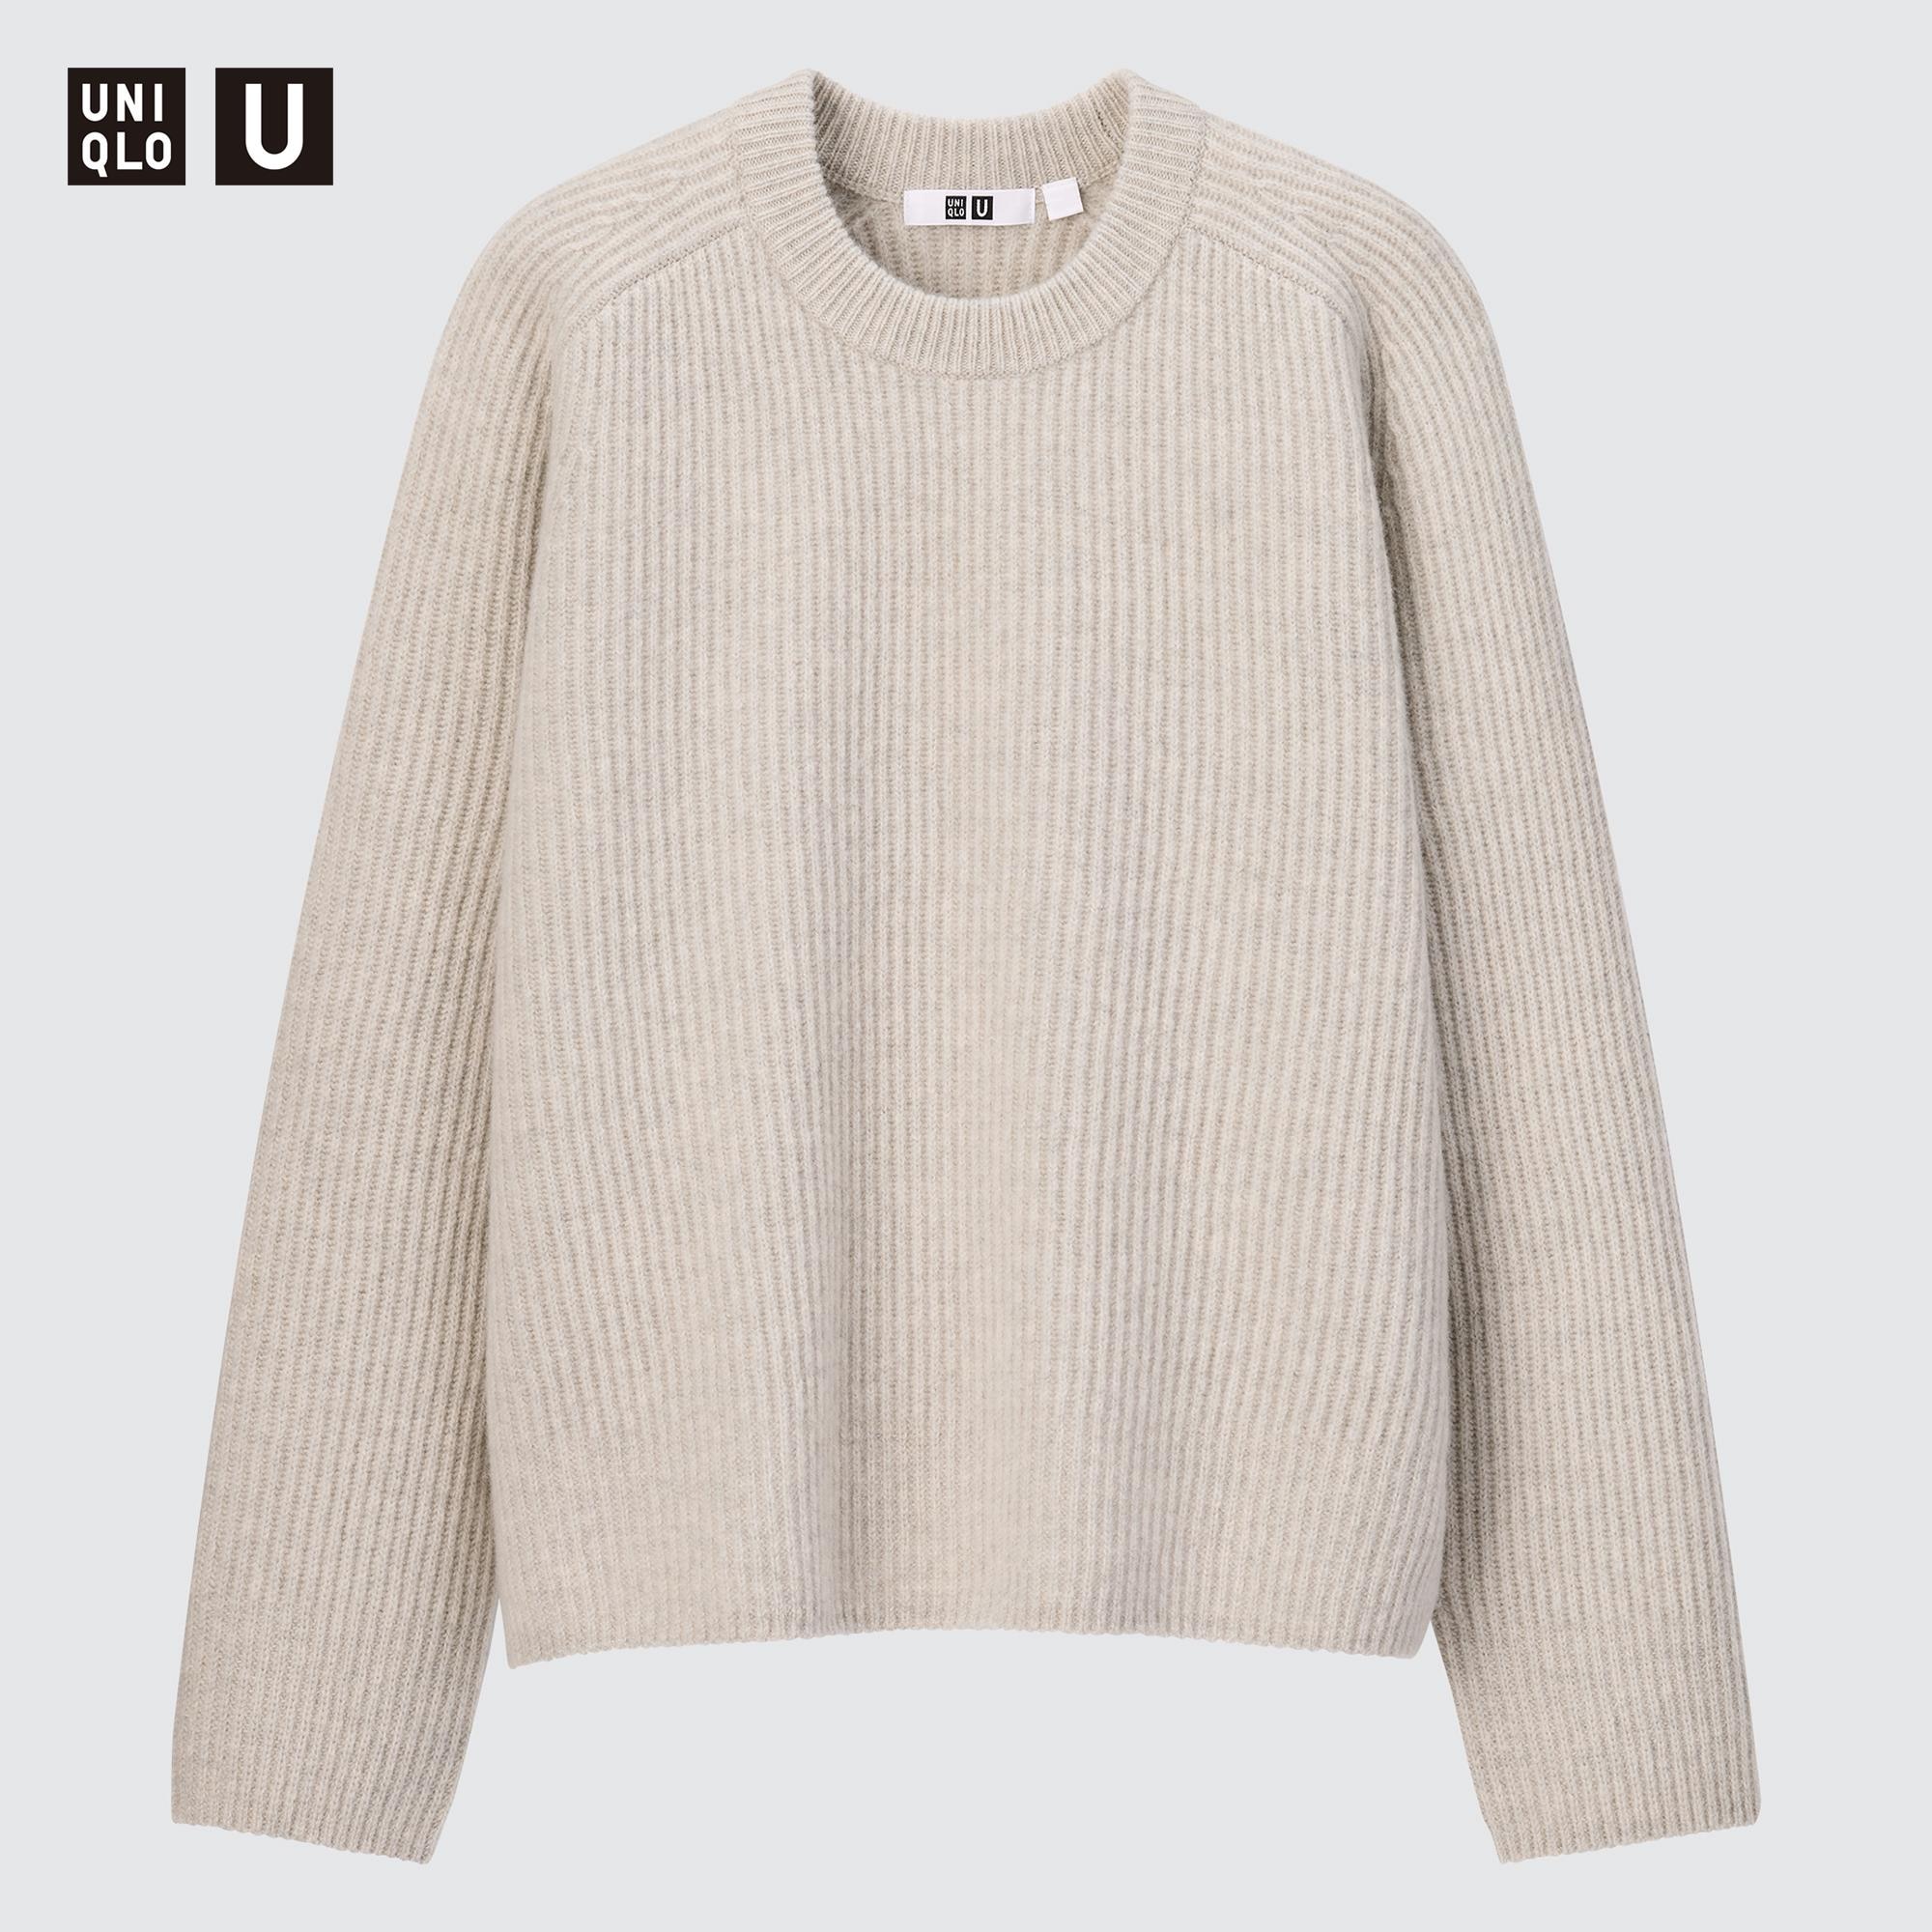 Uniqlo 3D Knit Lambswool Sweater Sale 2018  The Strategist